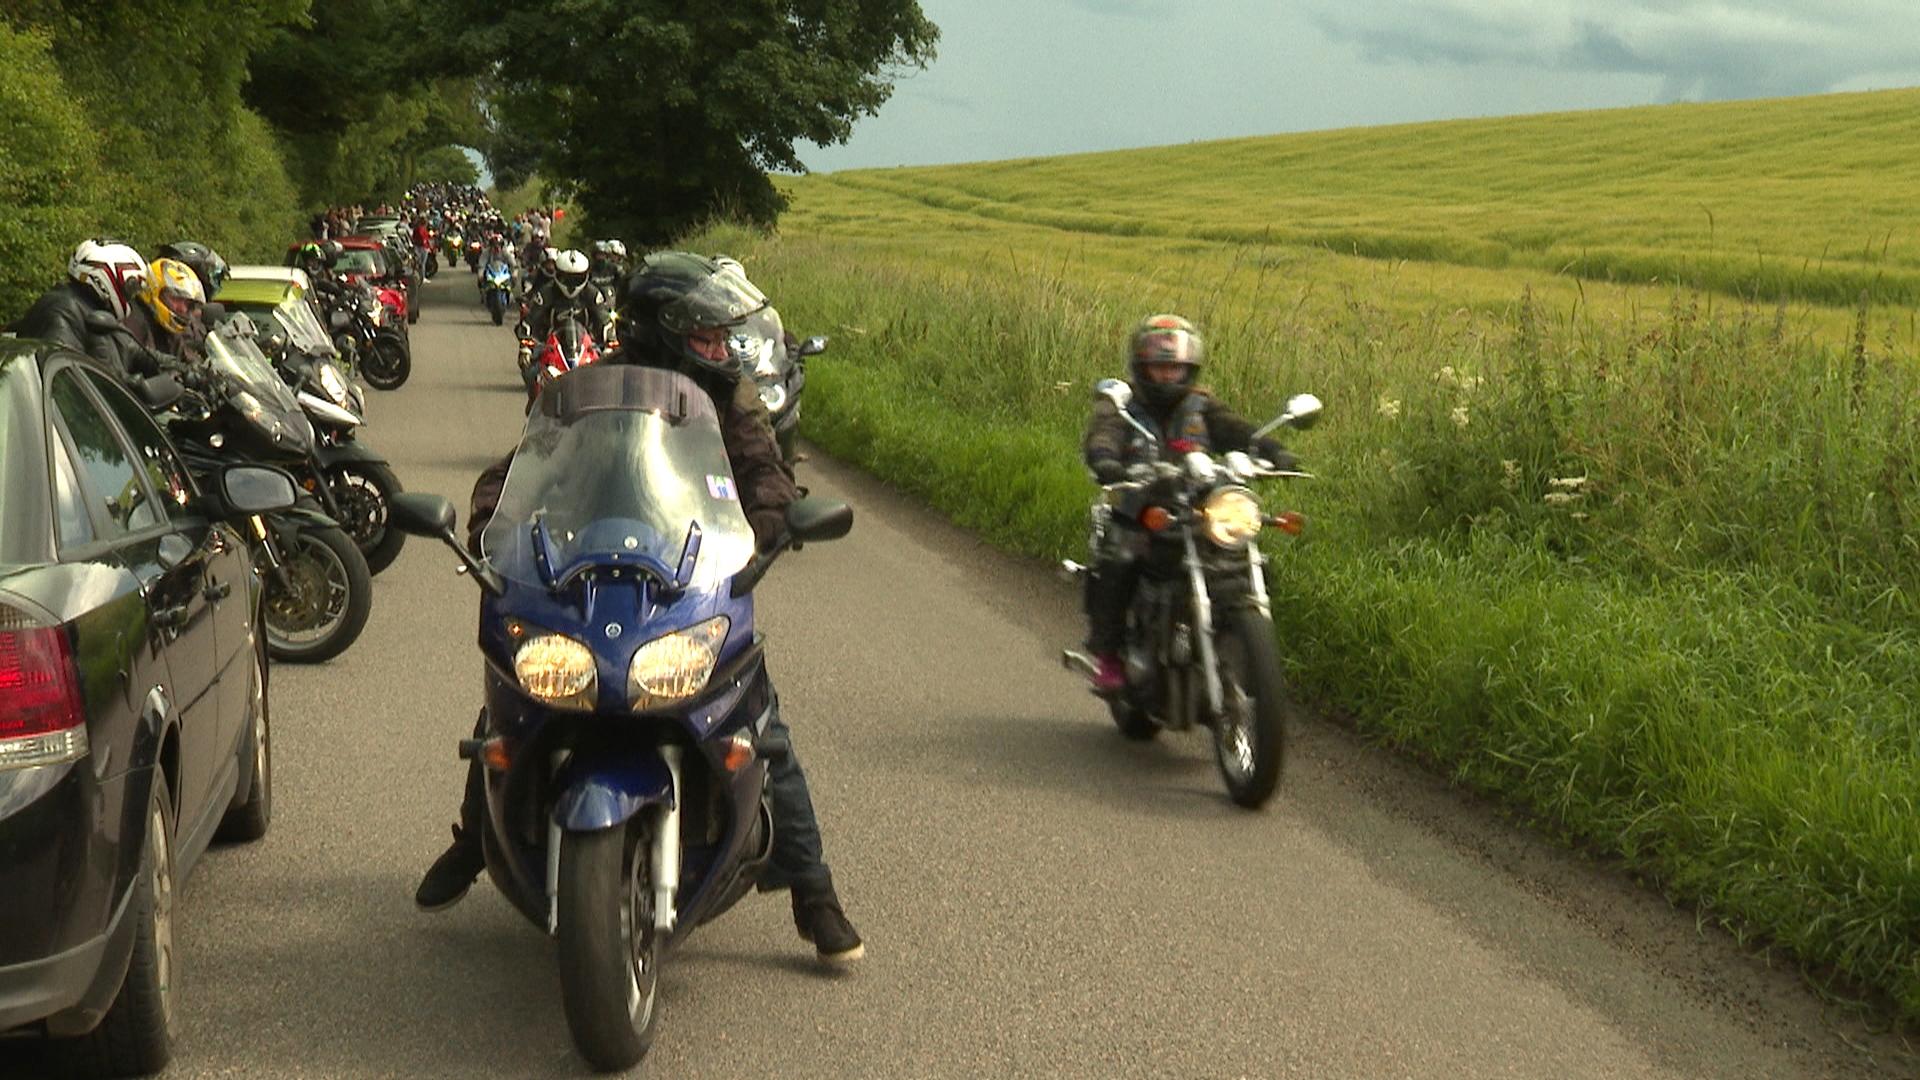 Steven was honoured in 2019 by hundreds of motorcyclists across Scotland.